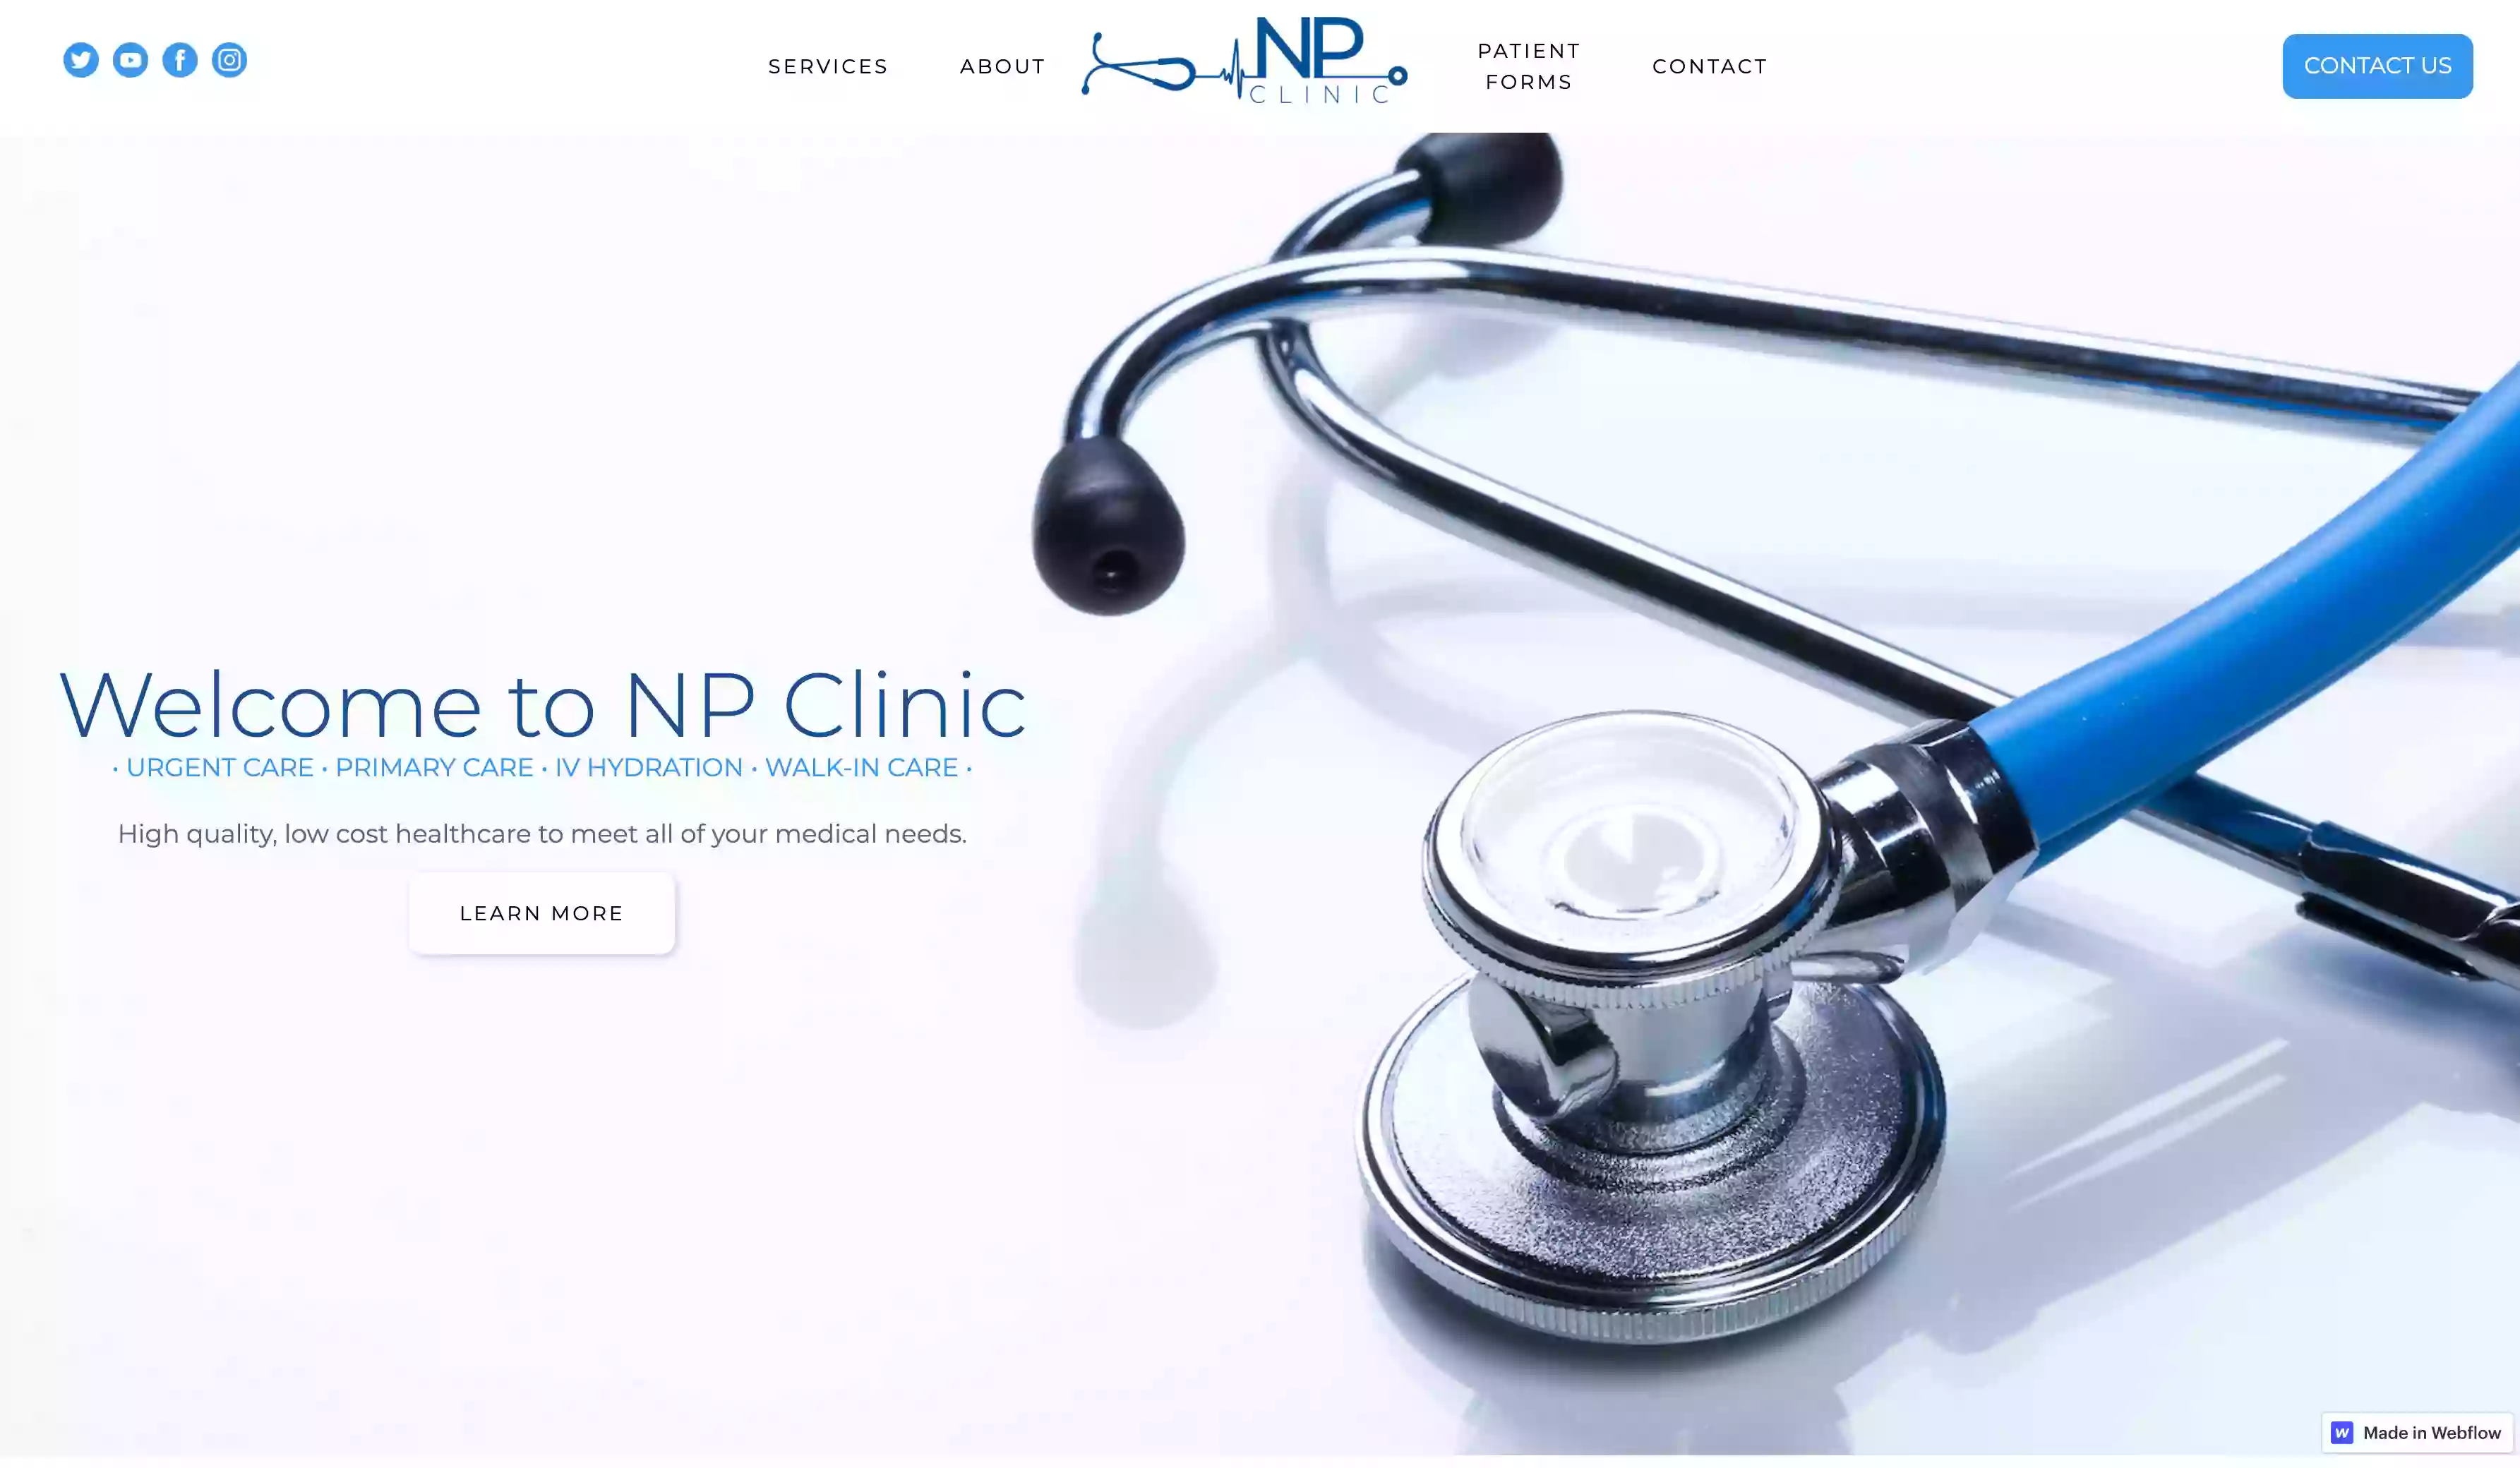 NP-CLINIC